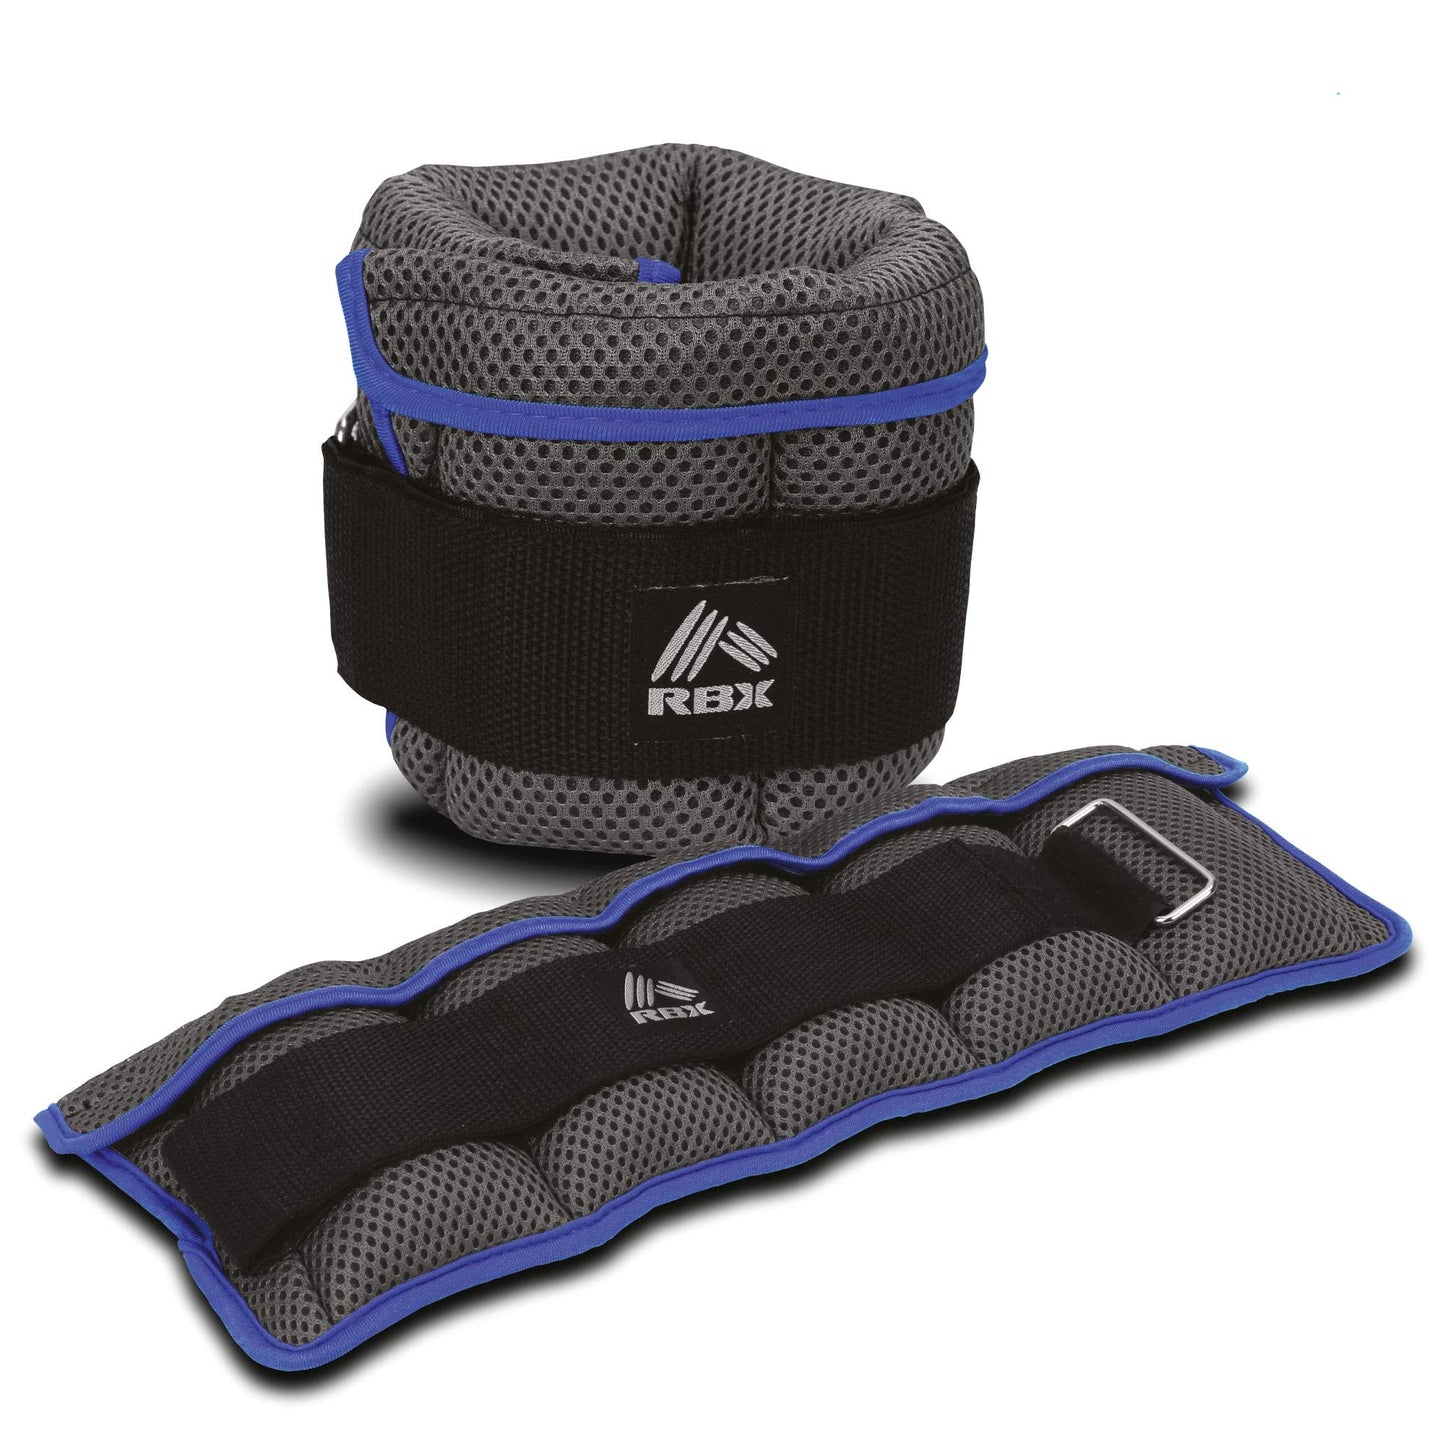 RBX 3lb Adjustable Wrist Ankle Weights with Removable Individual Weight Packs Set of 2 - Opticdeals